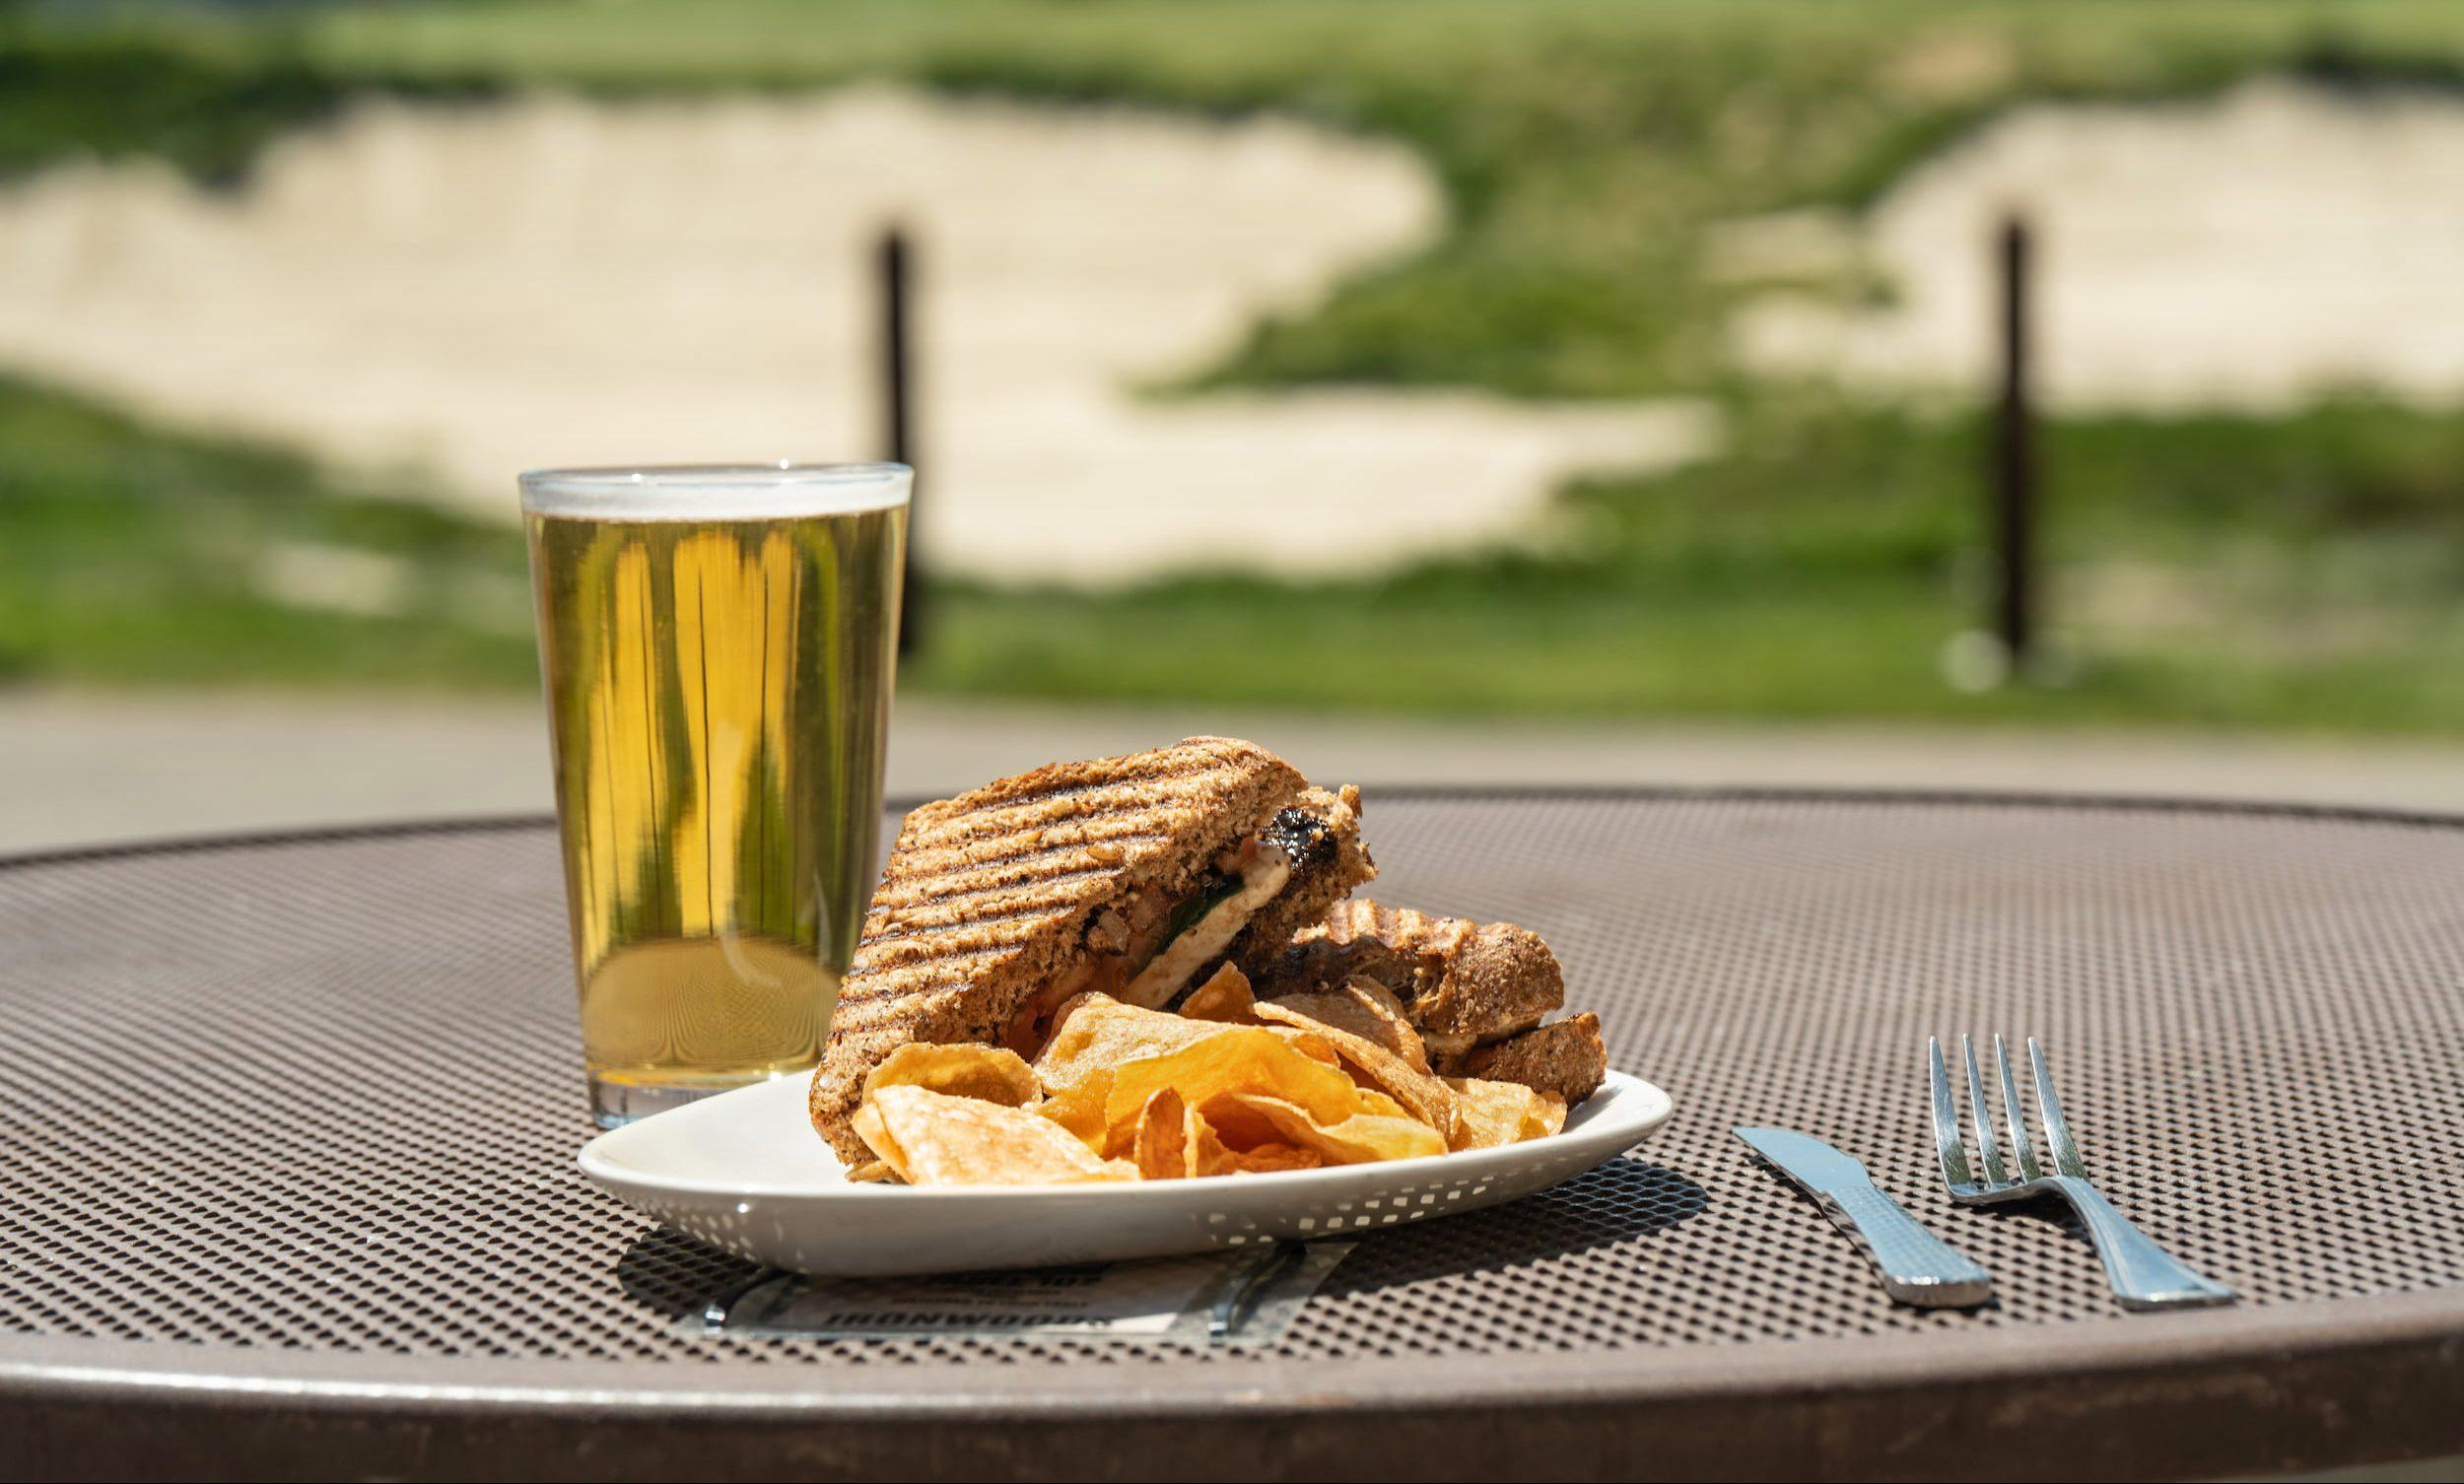 Image of a beer and a plate of food in front of the Presidio Golf Course.